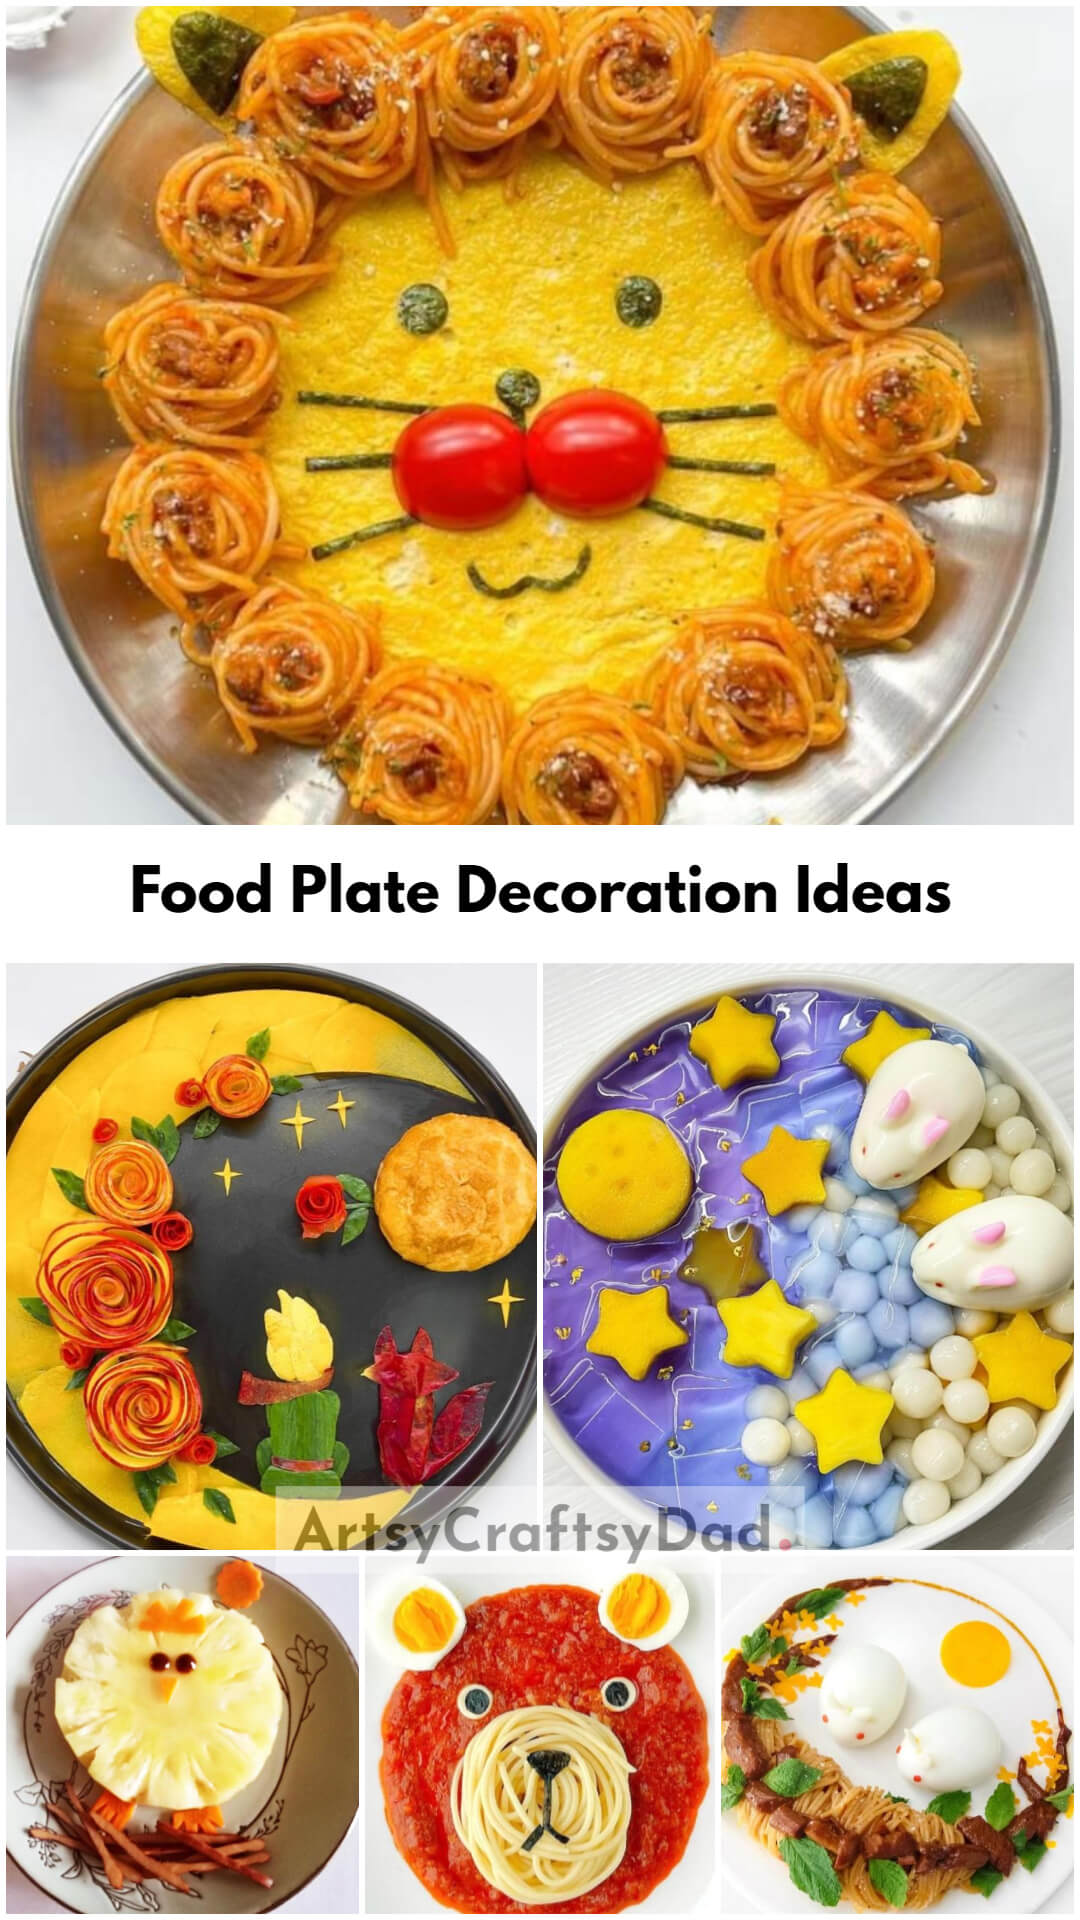  Food Plate Decoration Ideas To Make With Parents